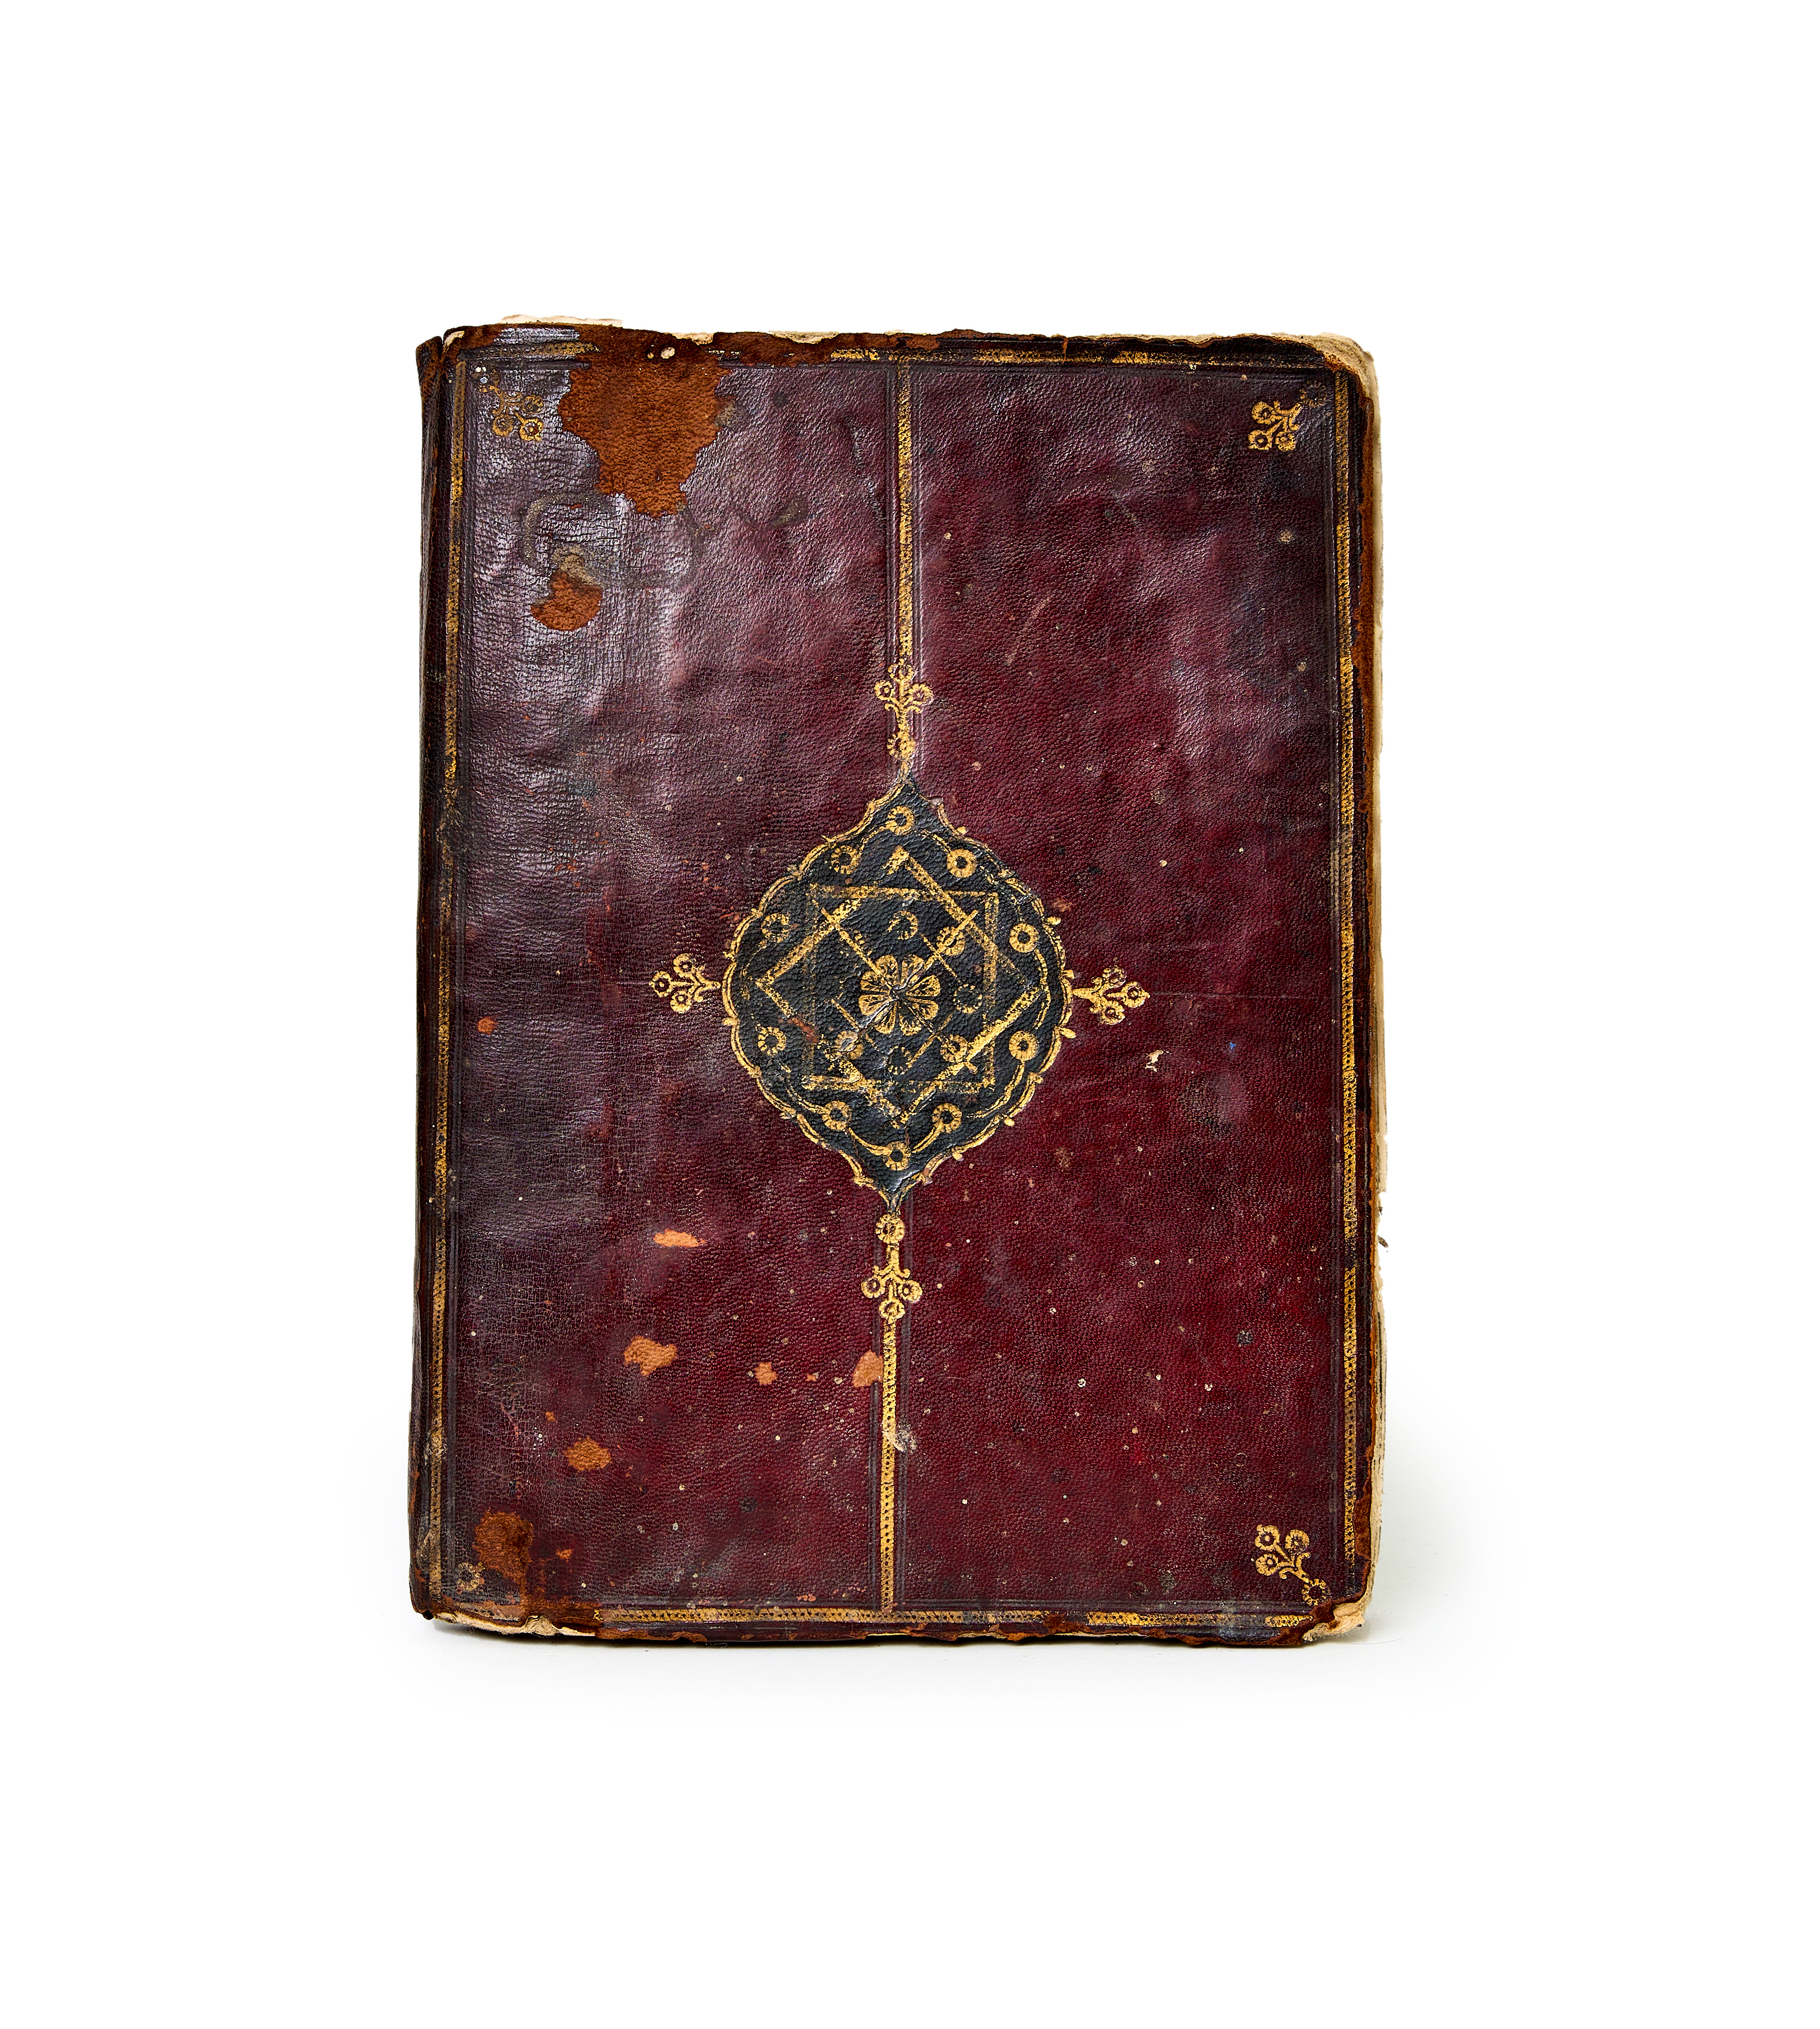 A PRAYER BOOK IN MAGHRIBI SCRIPT, DATED 1327AH, 18TH CENTURY, NORTH AFRICA - Image 4 of 4